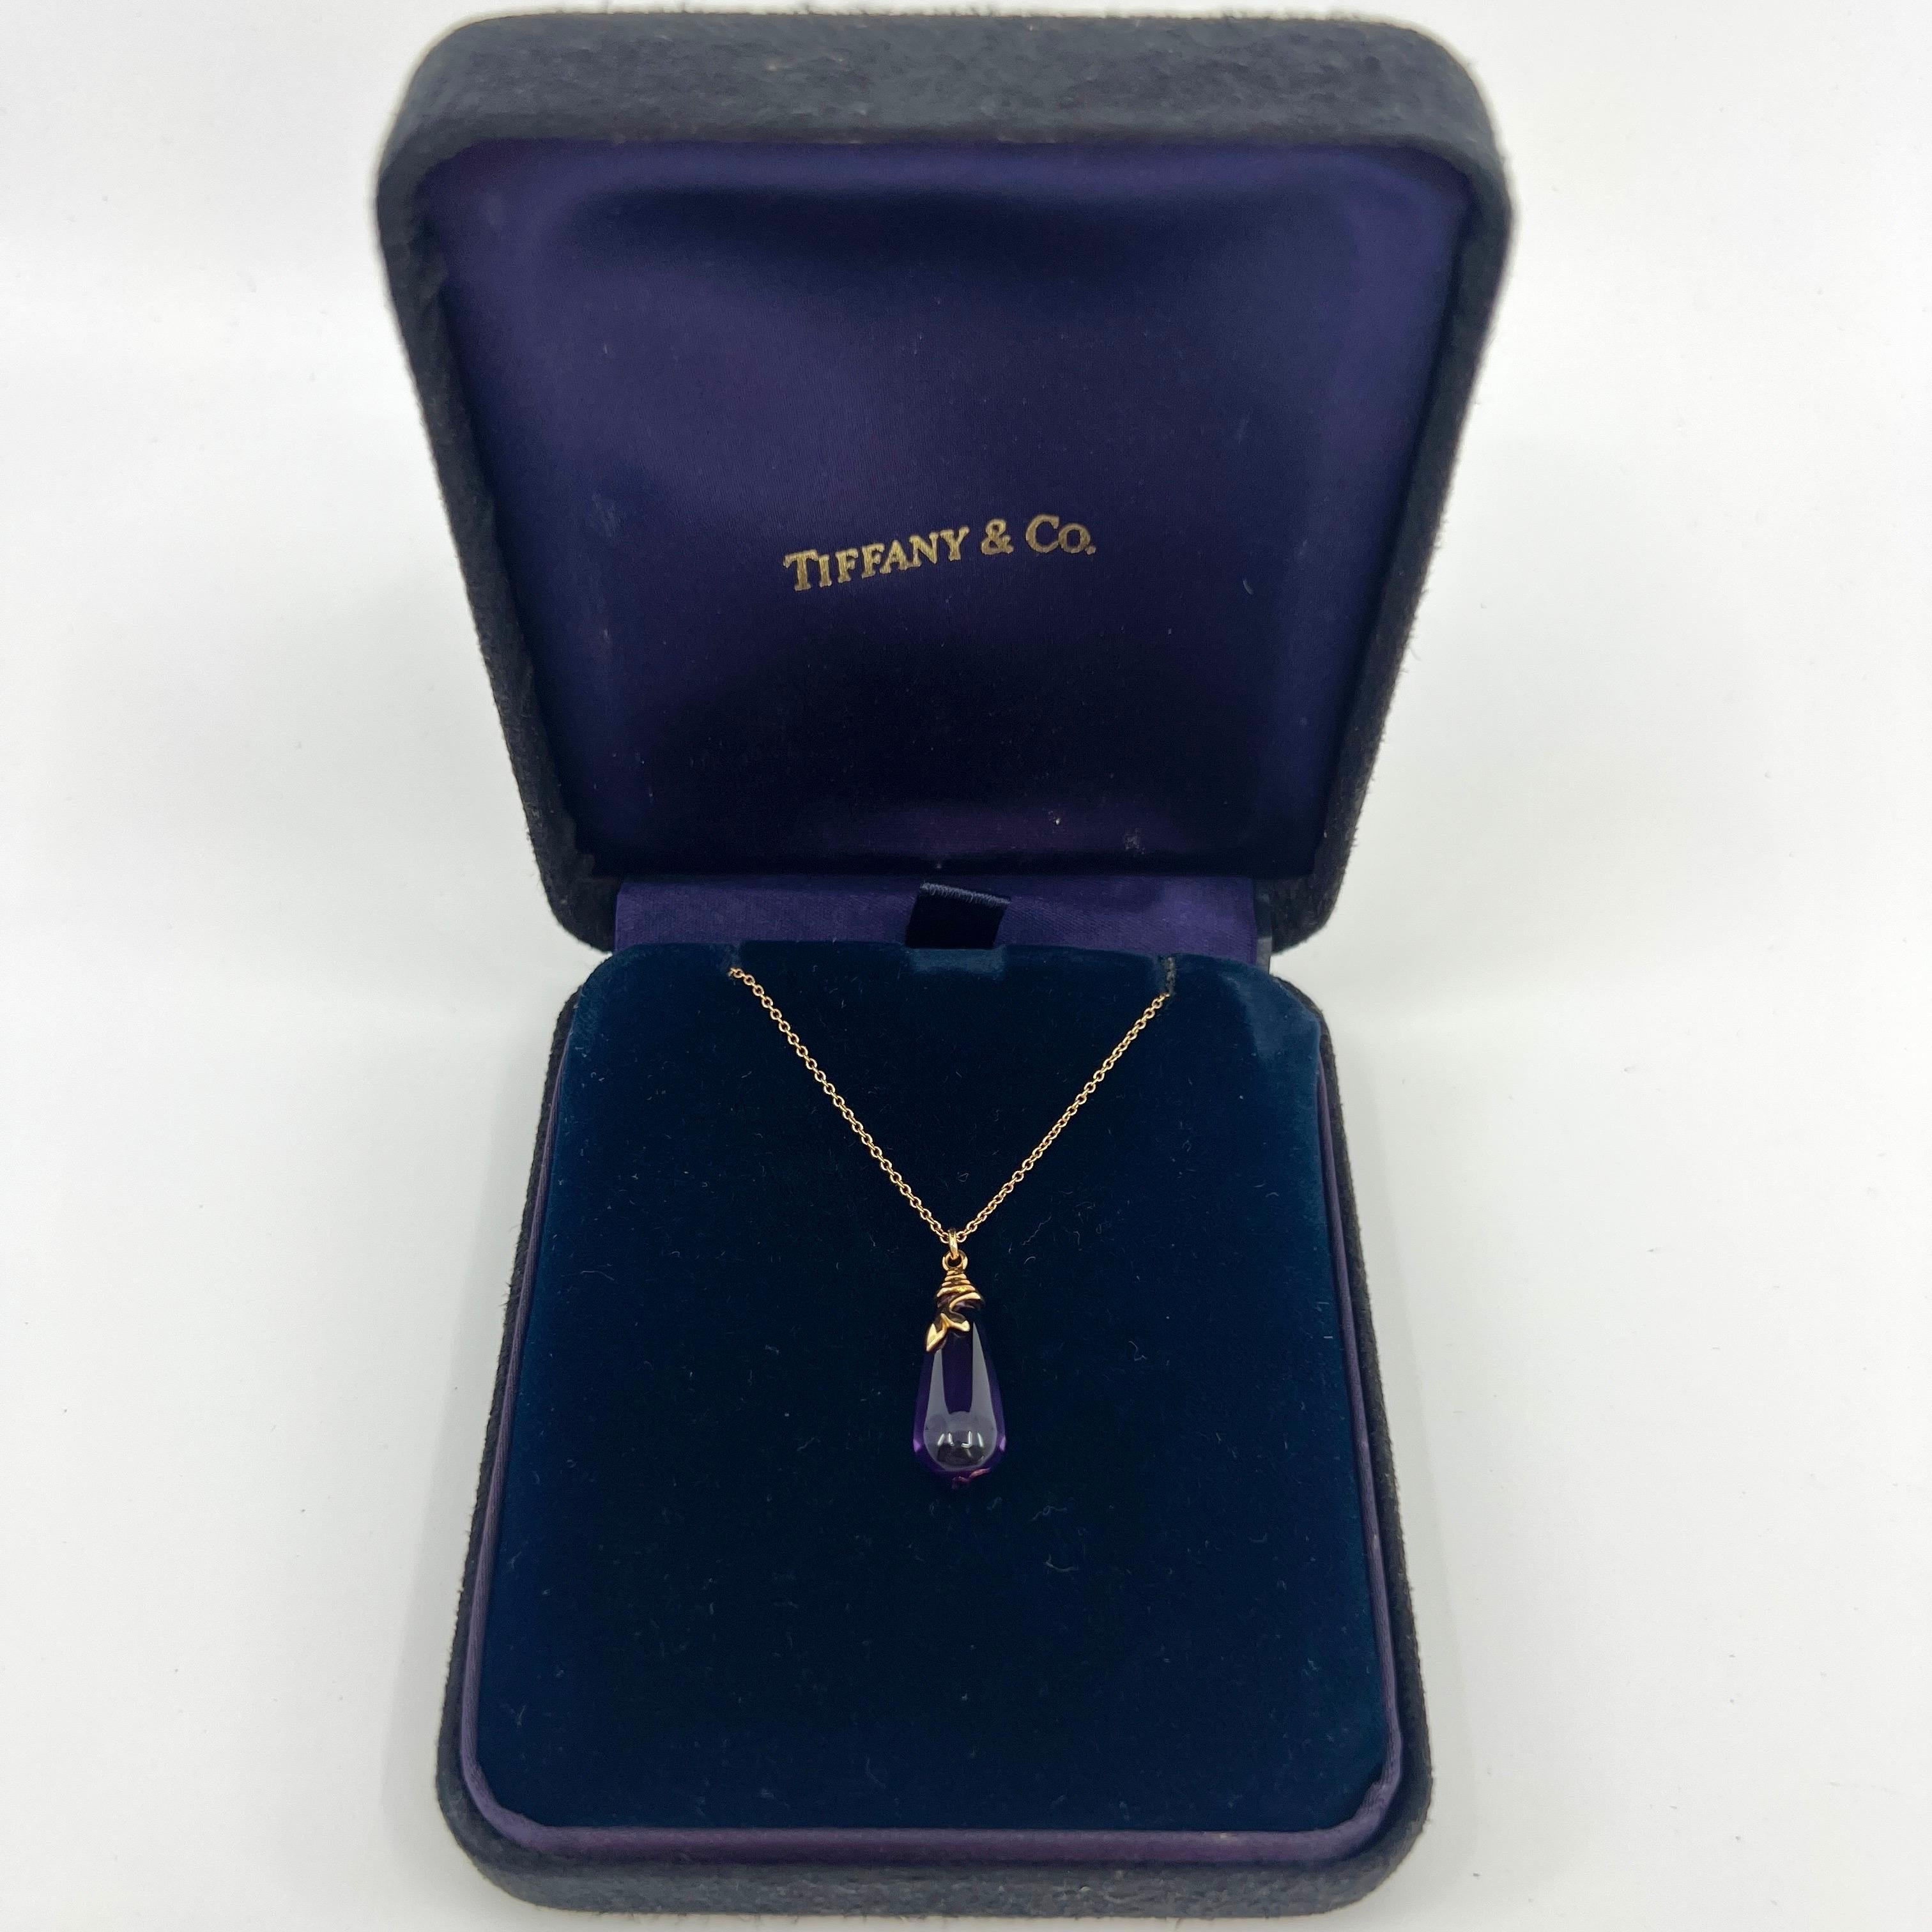 Rare Tiffany & Co. Paloma Picasso Olive Leaf Amethyst 18k Yellow Gold Drop Pendant Necklace.

A beautiful and rare 18k gold pendant necklace set with a stunning purple amethyst drop measuring approx. 26.3x8.2mm.

Fine jewellery houses like Tiffany